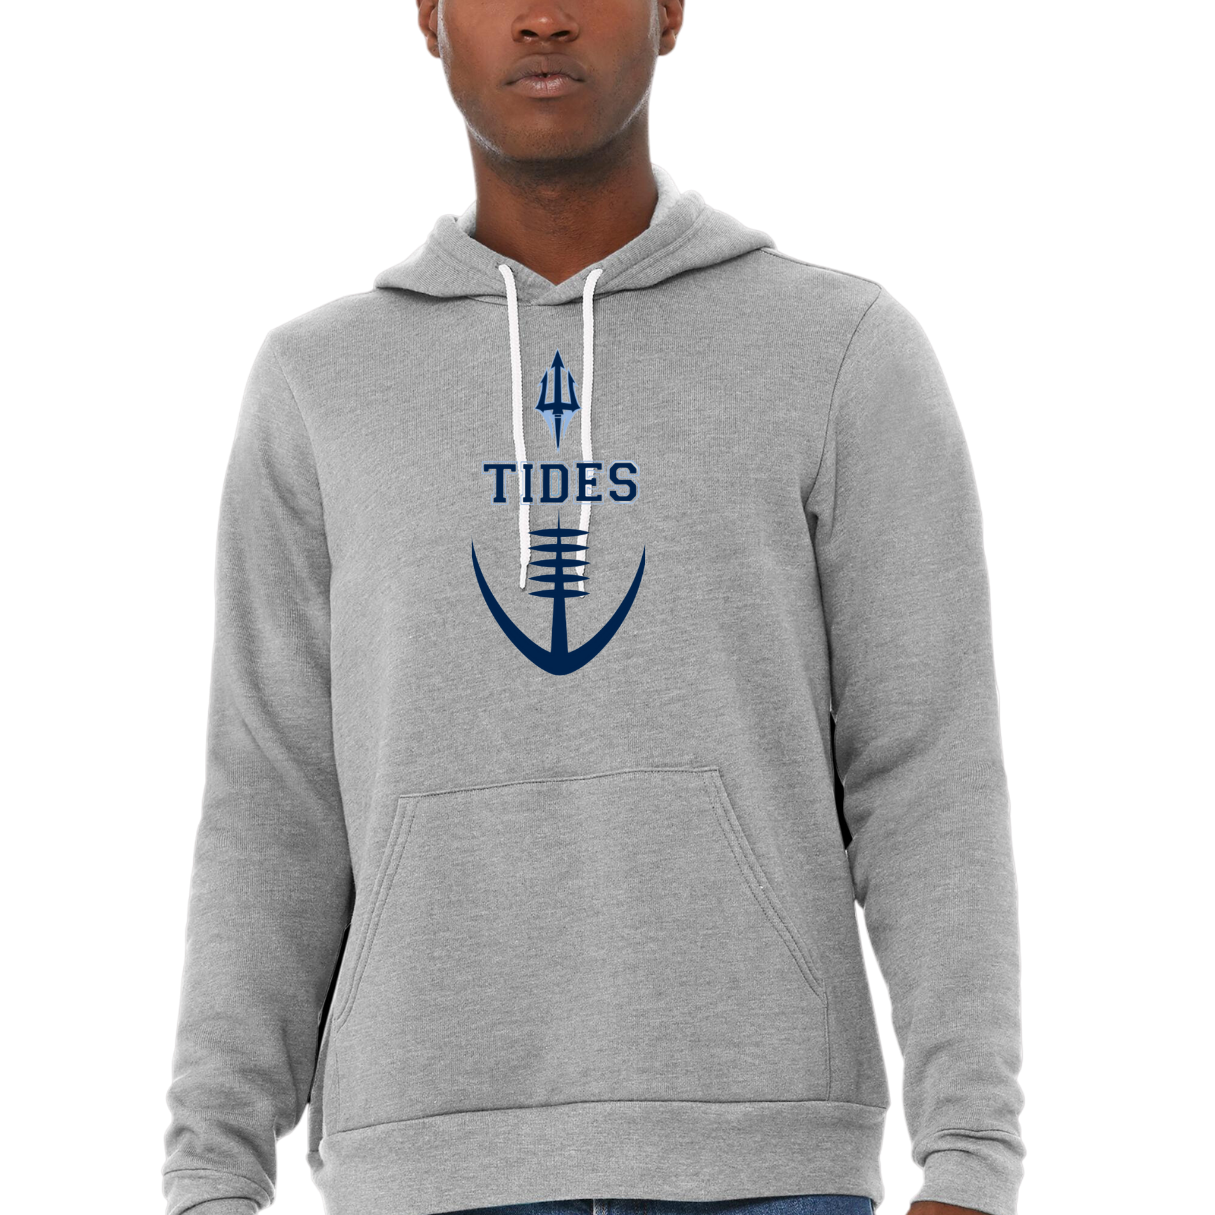 Tides Football Trident Hooded Sweatshirt - Adult and Youth